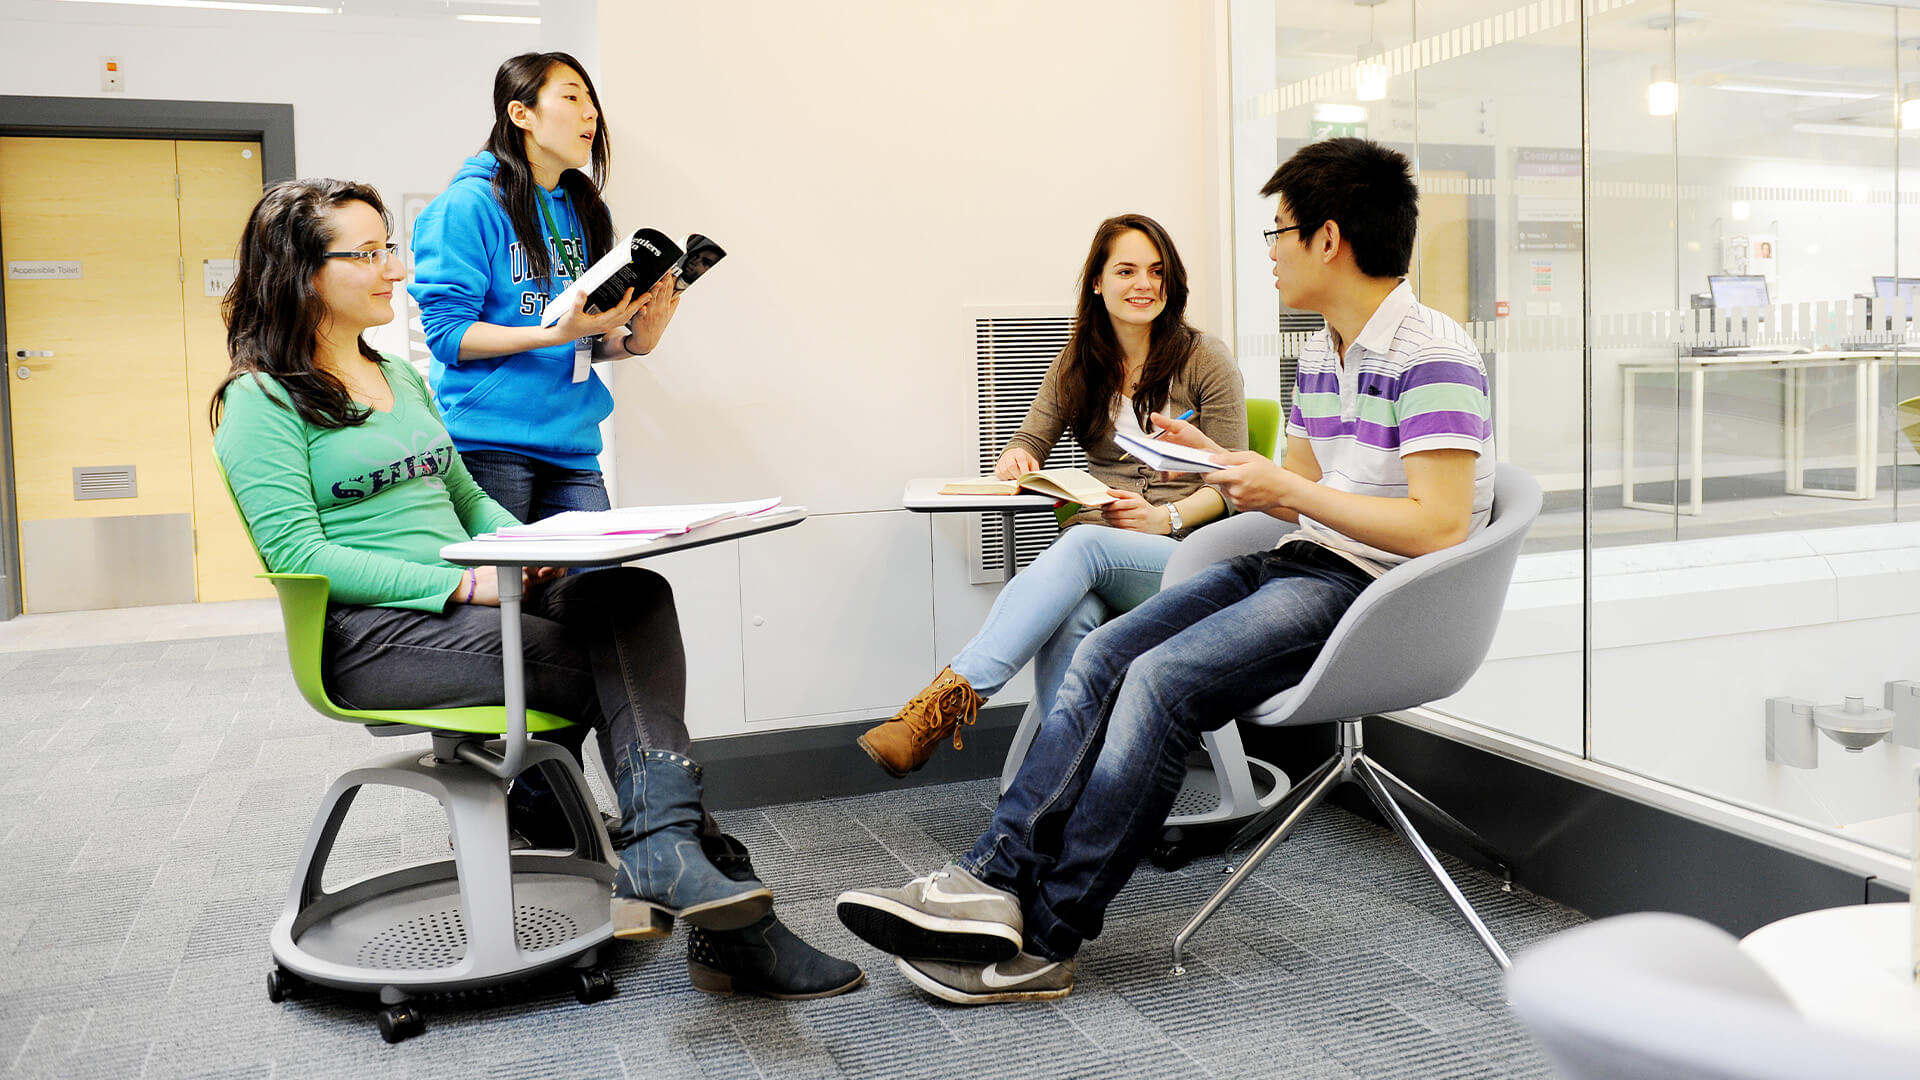 Students studying in the University of Stirling campus library